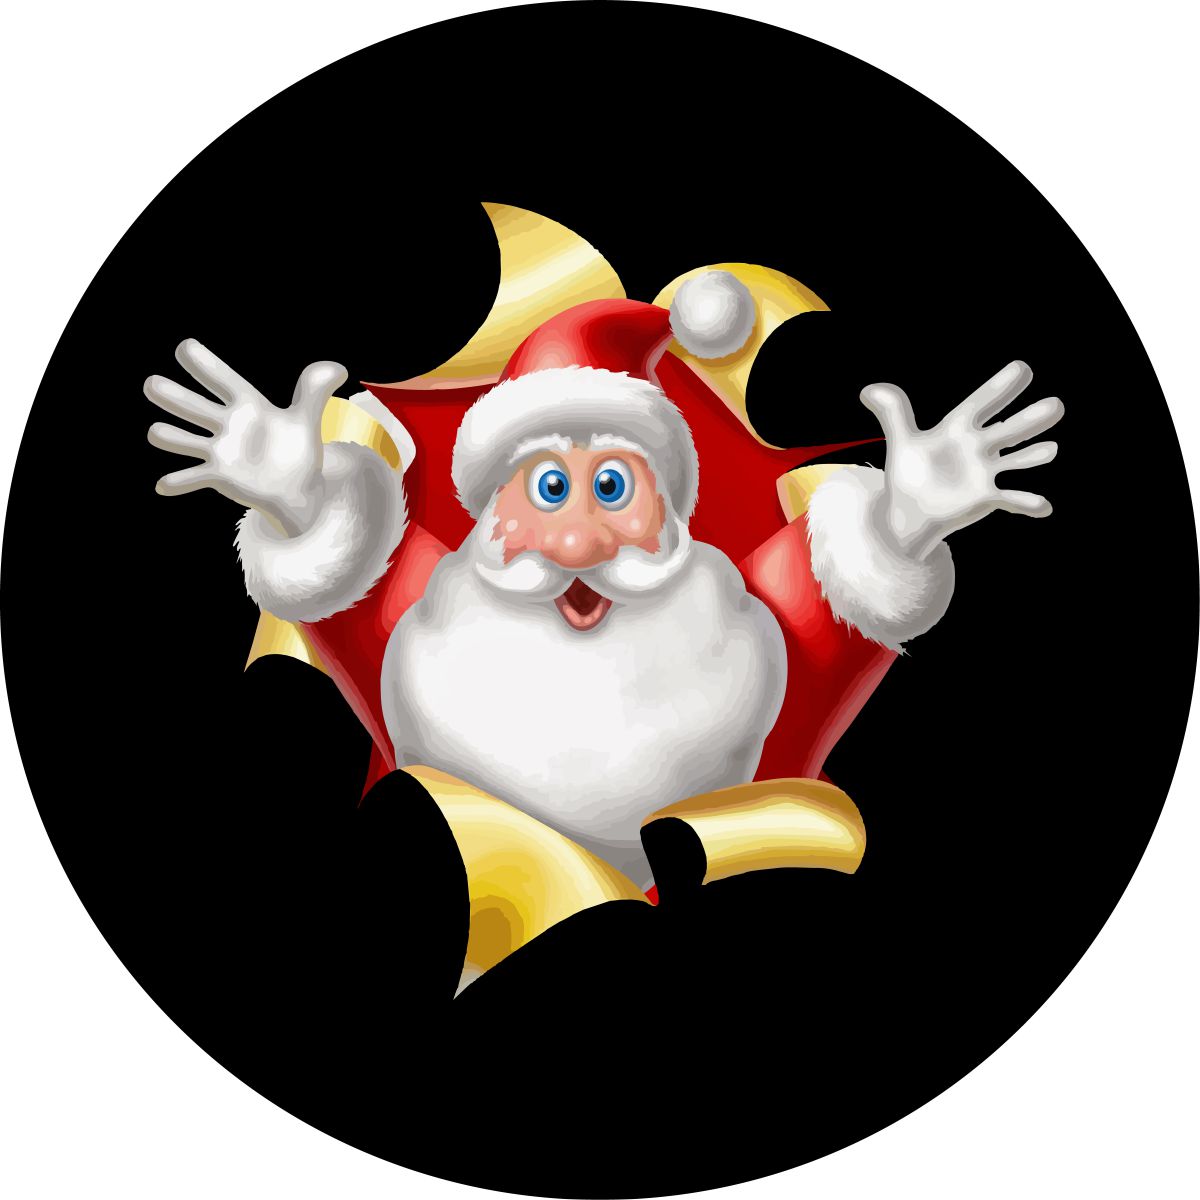 Black vinyl spare tire cover design for a Jeep, RV, camper, bronco spare tire or Santa Claus busting out of the center like a present.